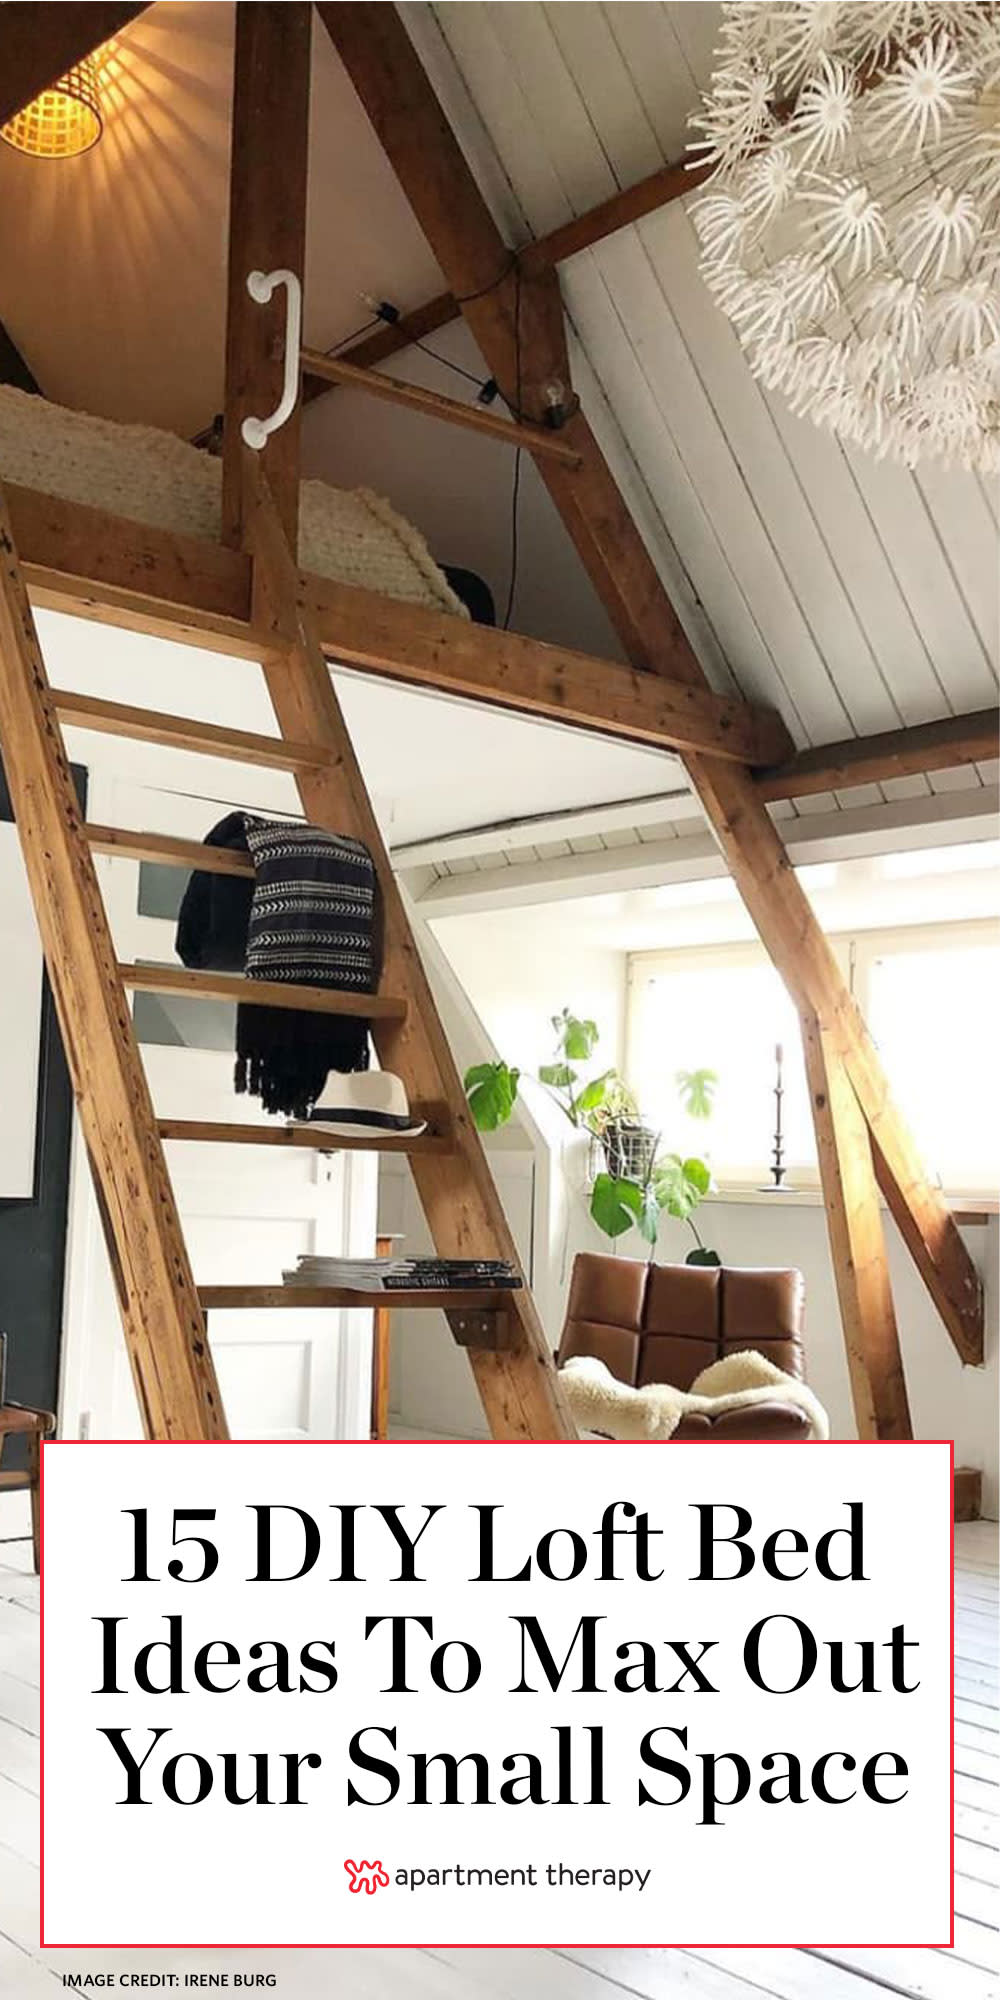 20 DIY Loft Bed Ideas   How to Loft a Queen, Full, or Twin Bed ...